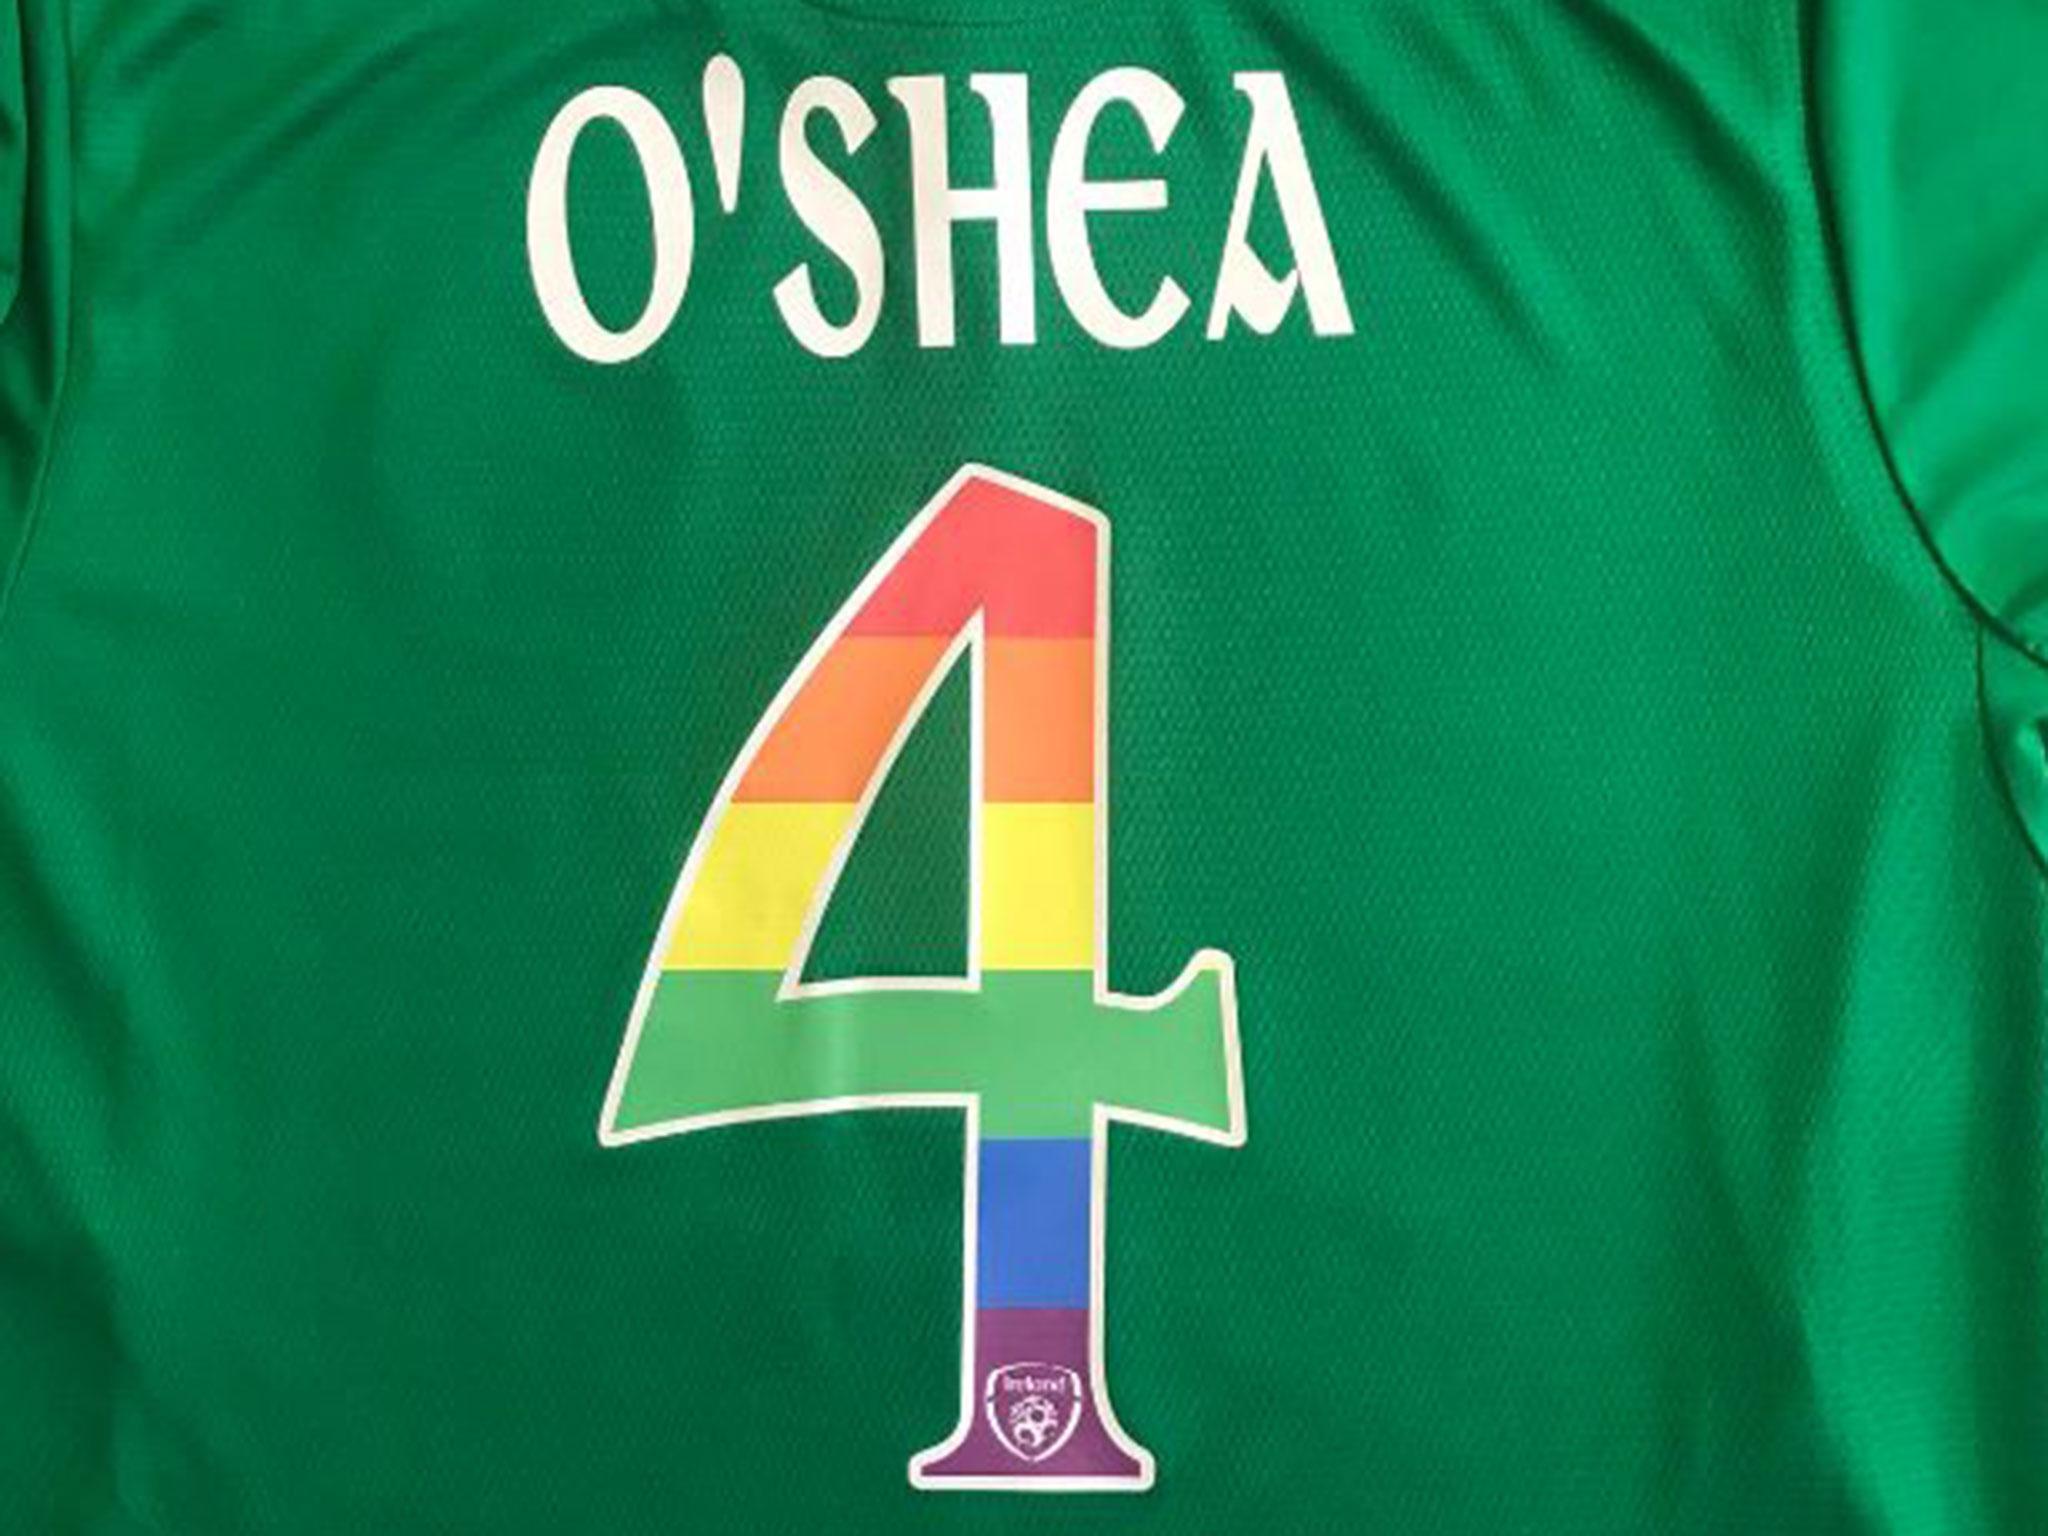 Ireland will wear the special shirts for the friendly with the USA